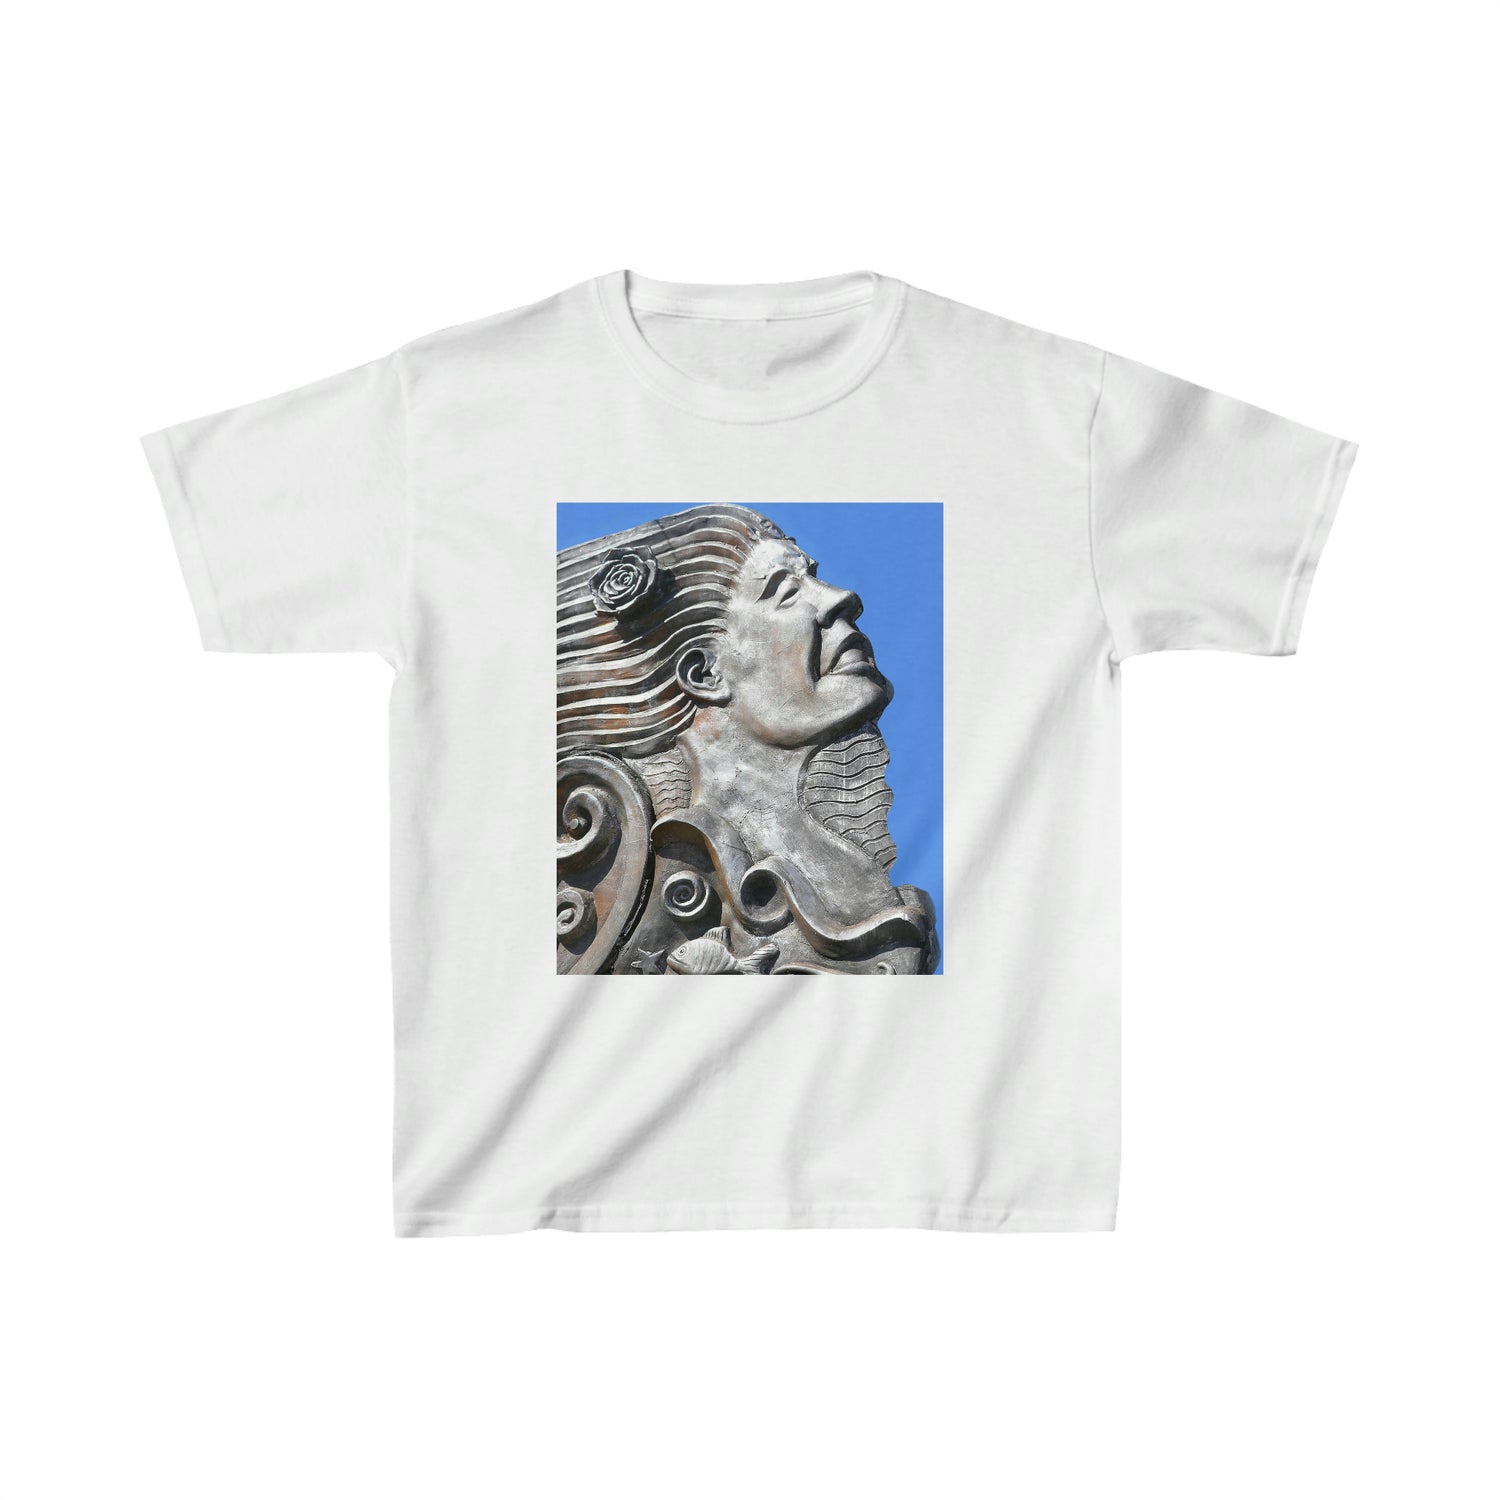 Nymph Beauty - Kids Cotton Tee - Fry1Productions